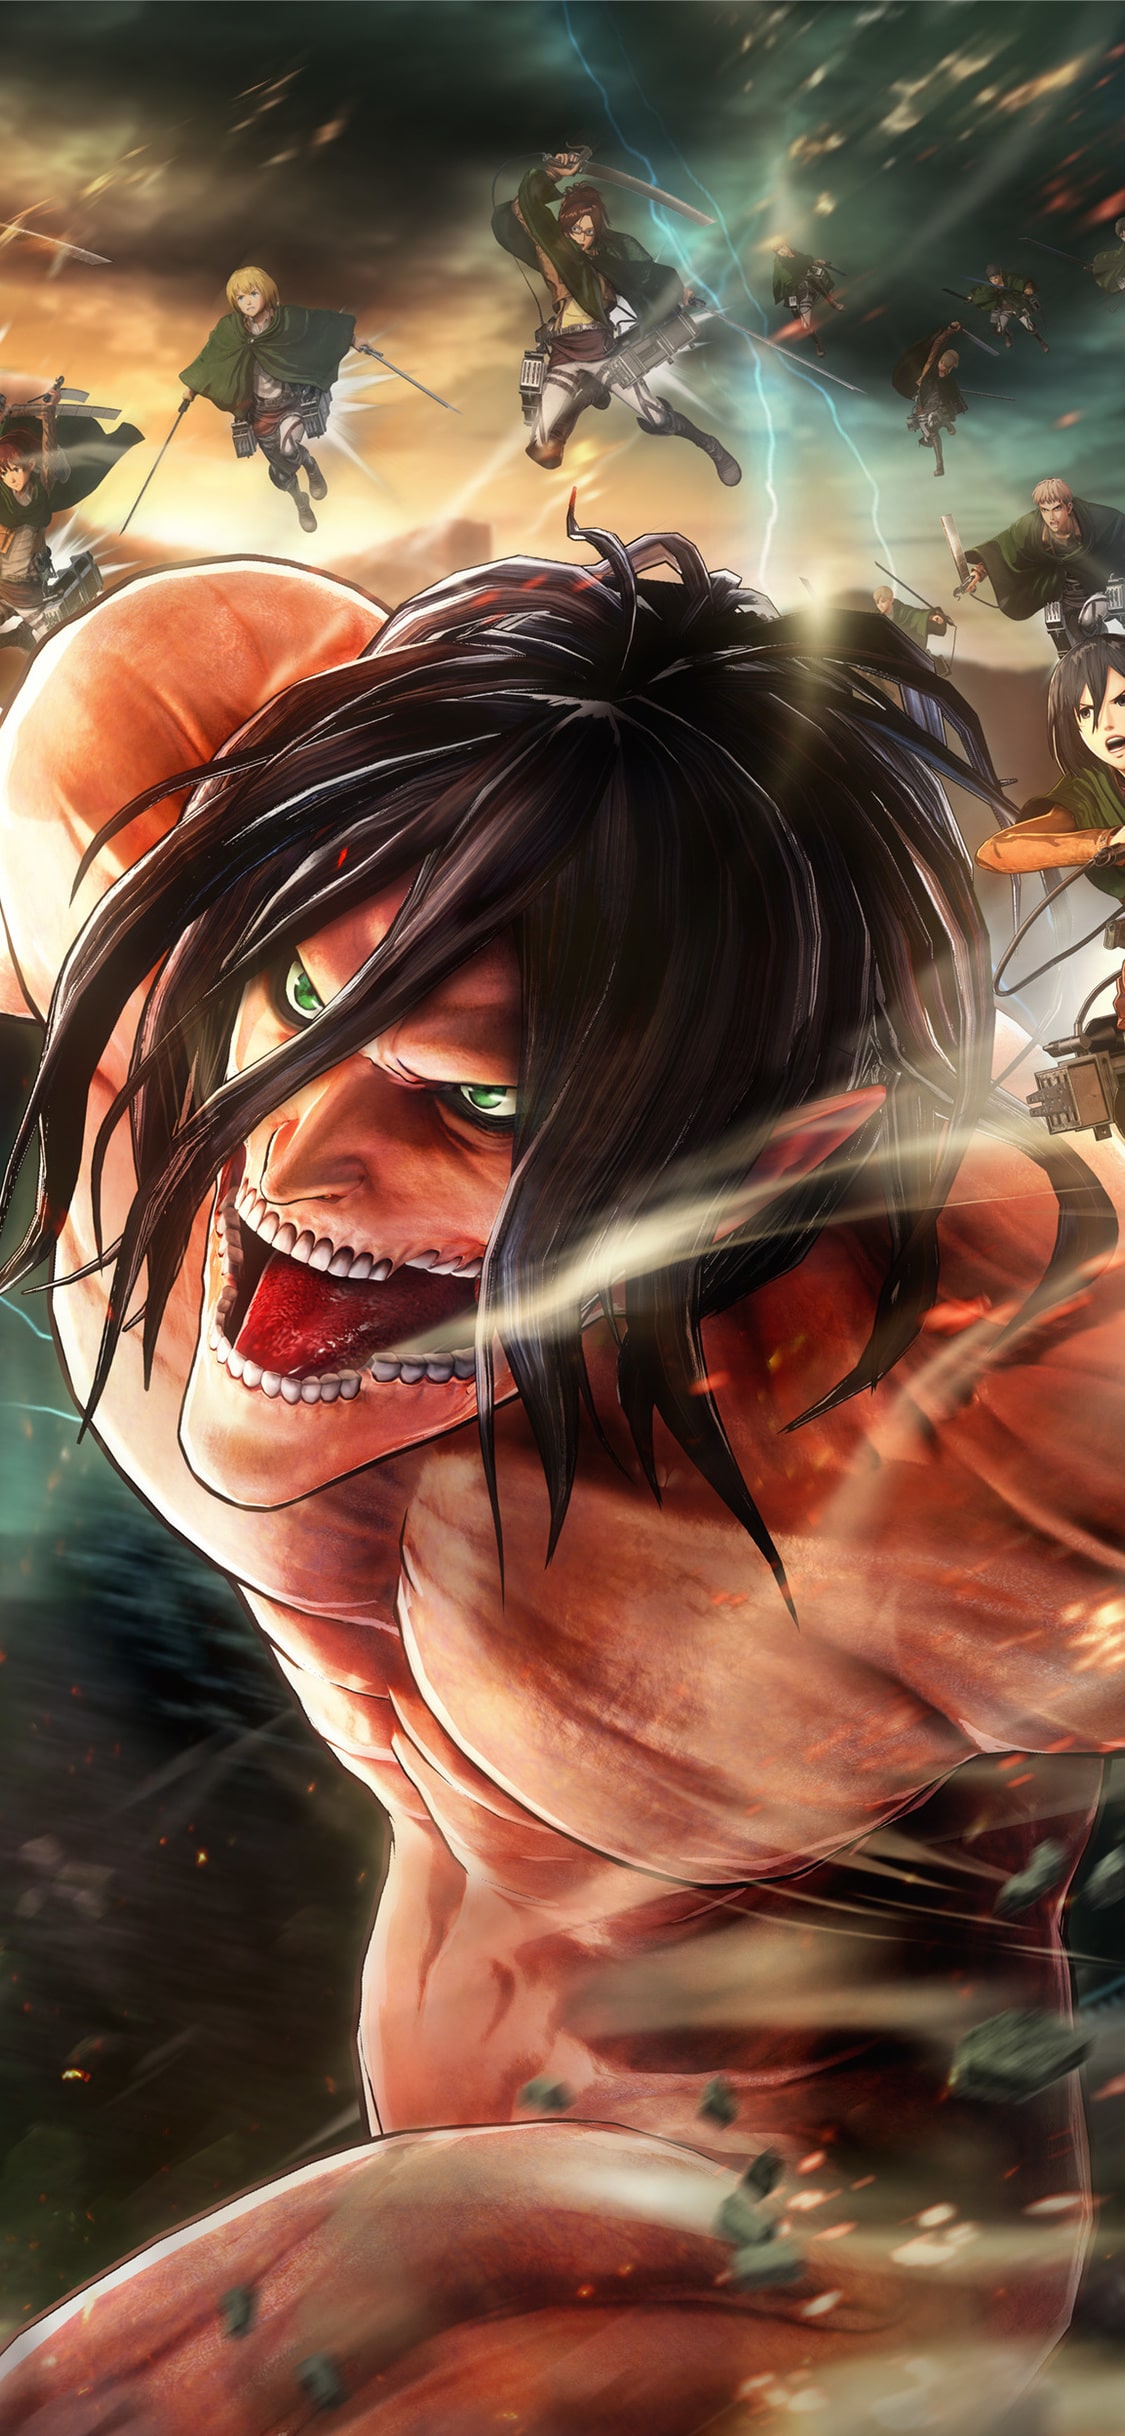 Attack On Titan Android Wallpaper - KoLPaPer - Awesome Free HD Wallpapers